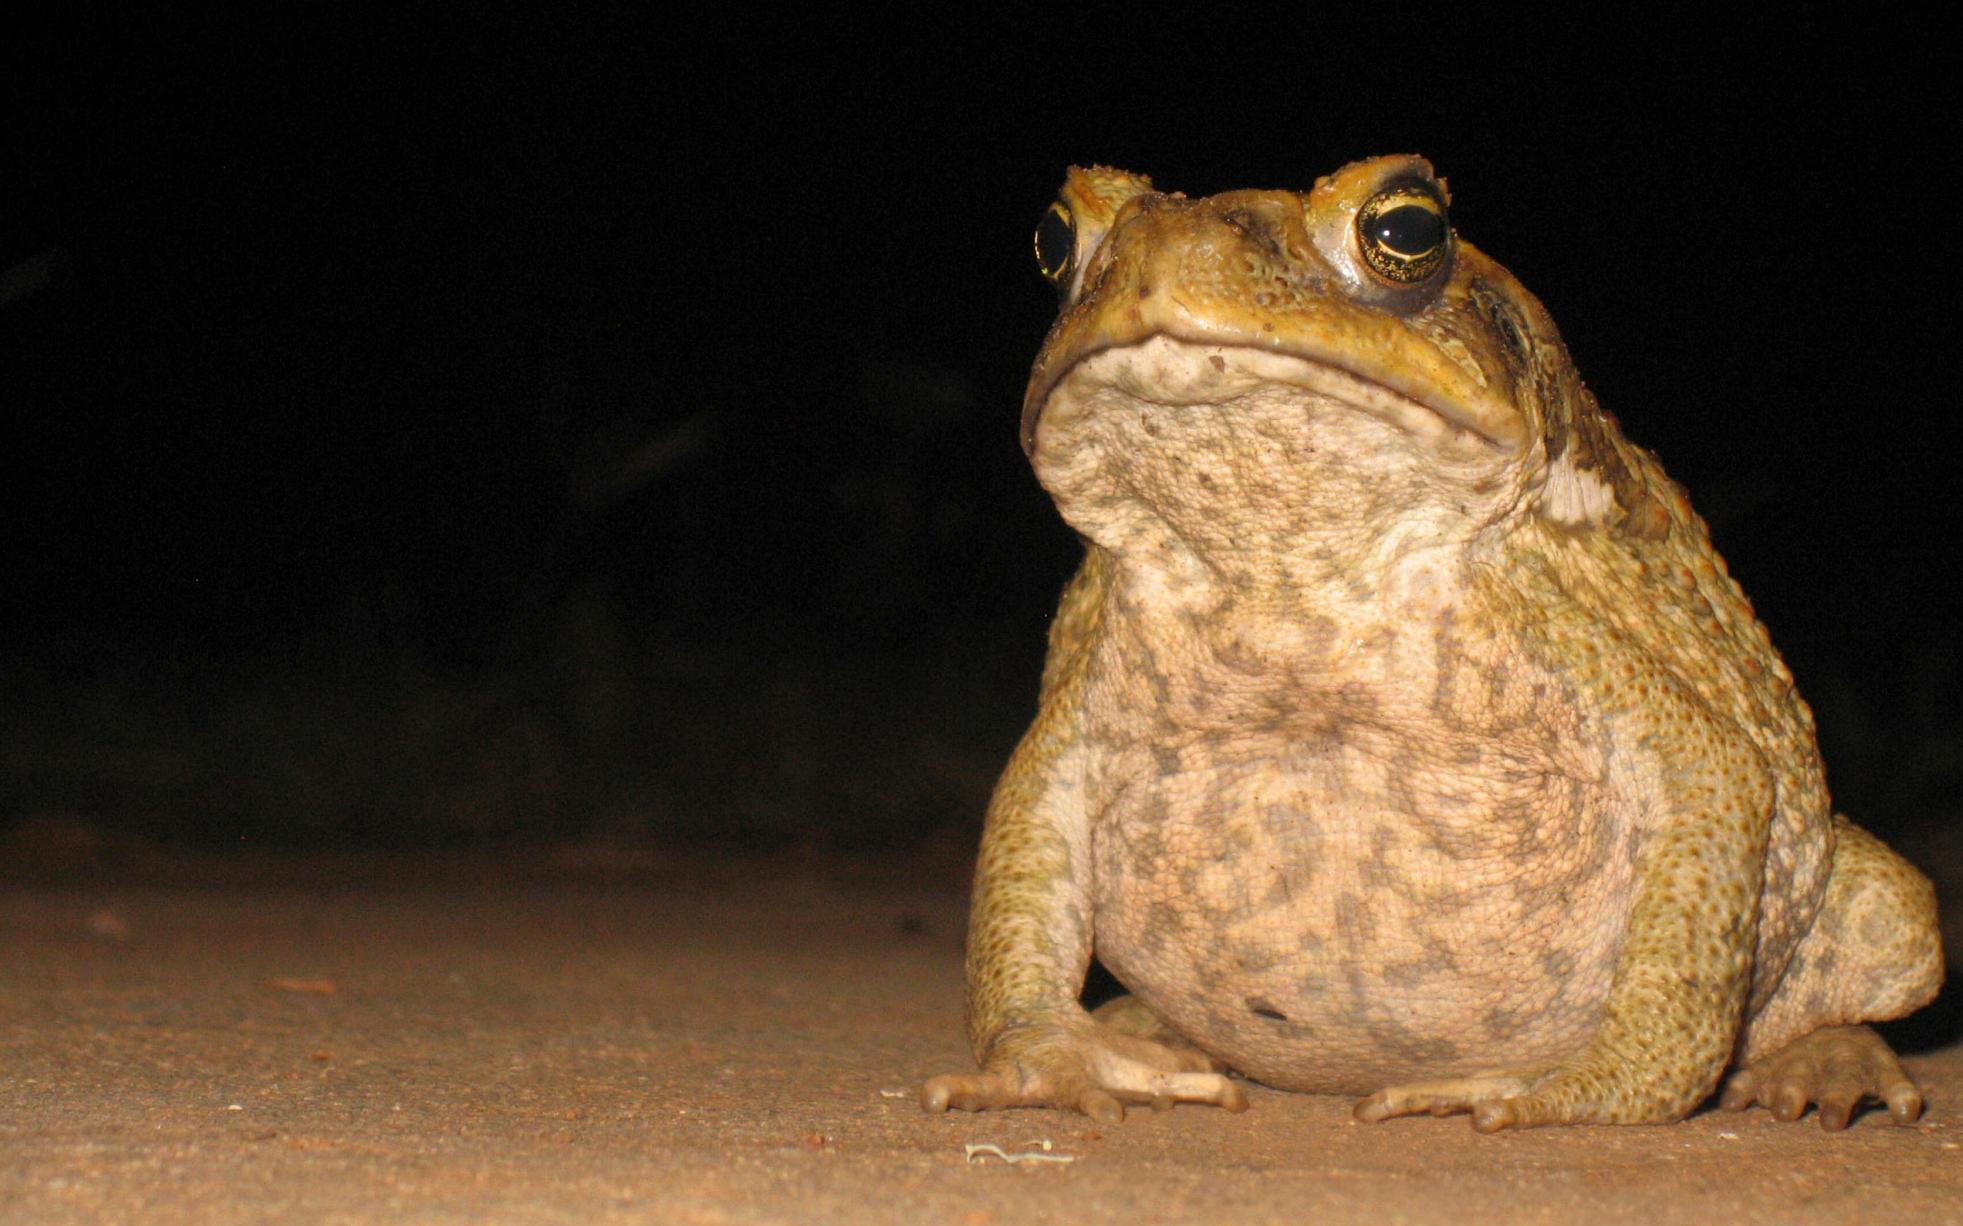 A cane toad in Litchfield National Park, Northern Territory.